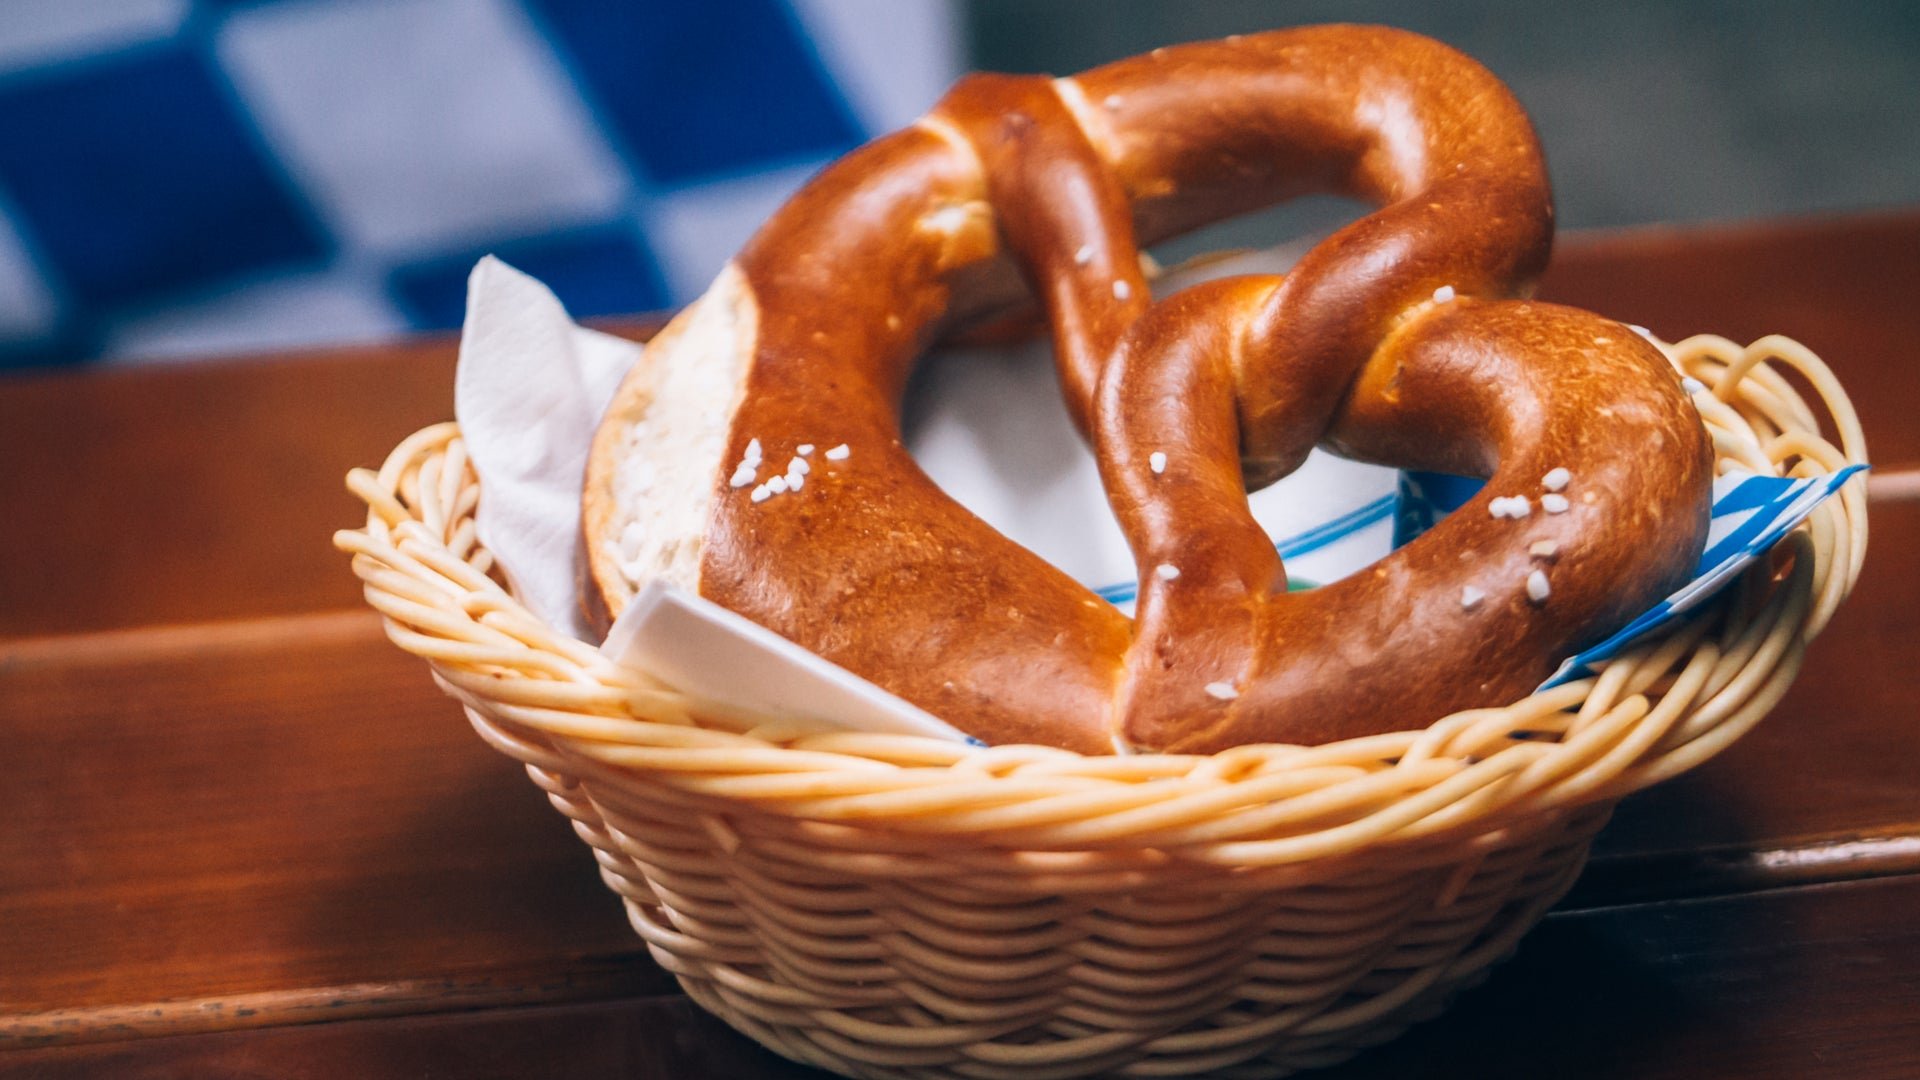 The Pretzel: A Twisted History